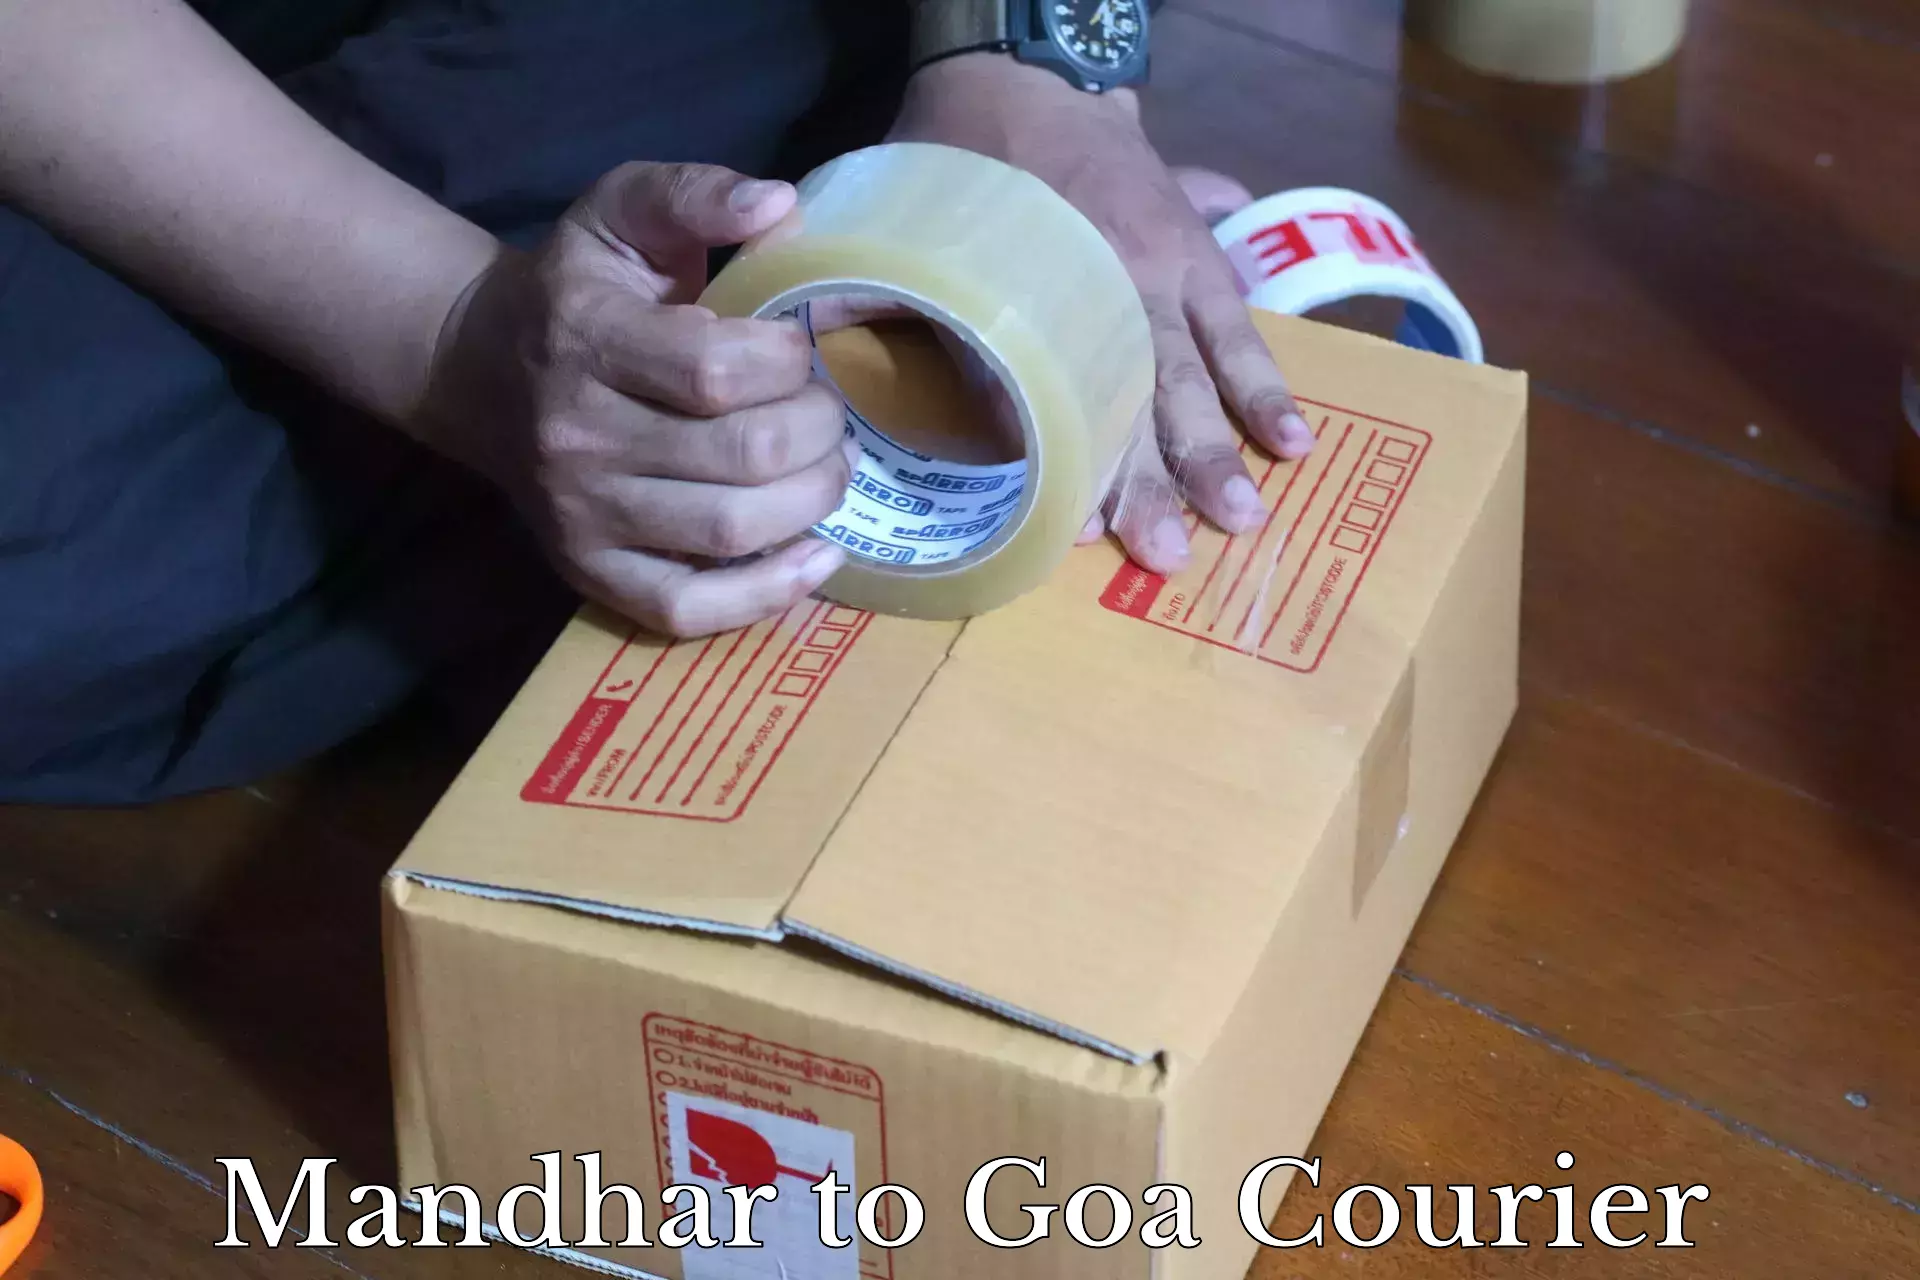 Efficient package consolidation Mandhar to Goa